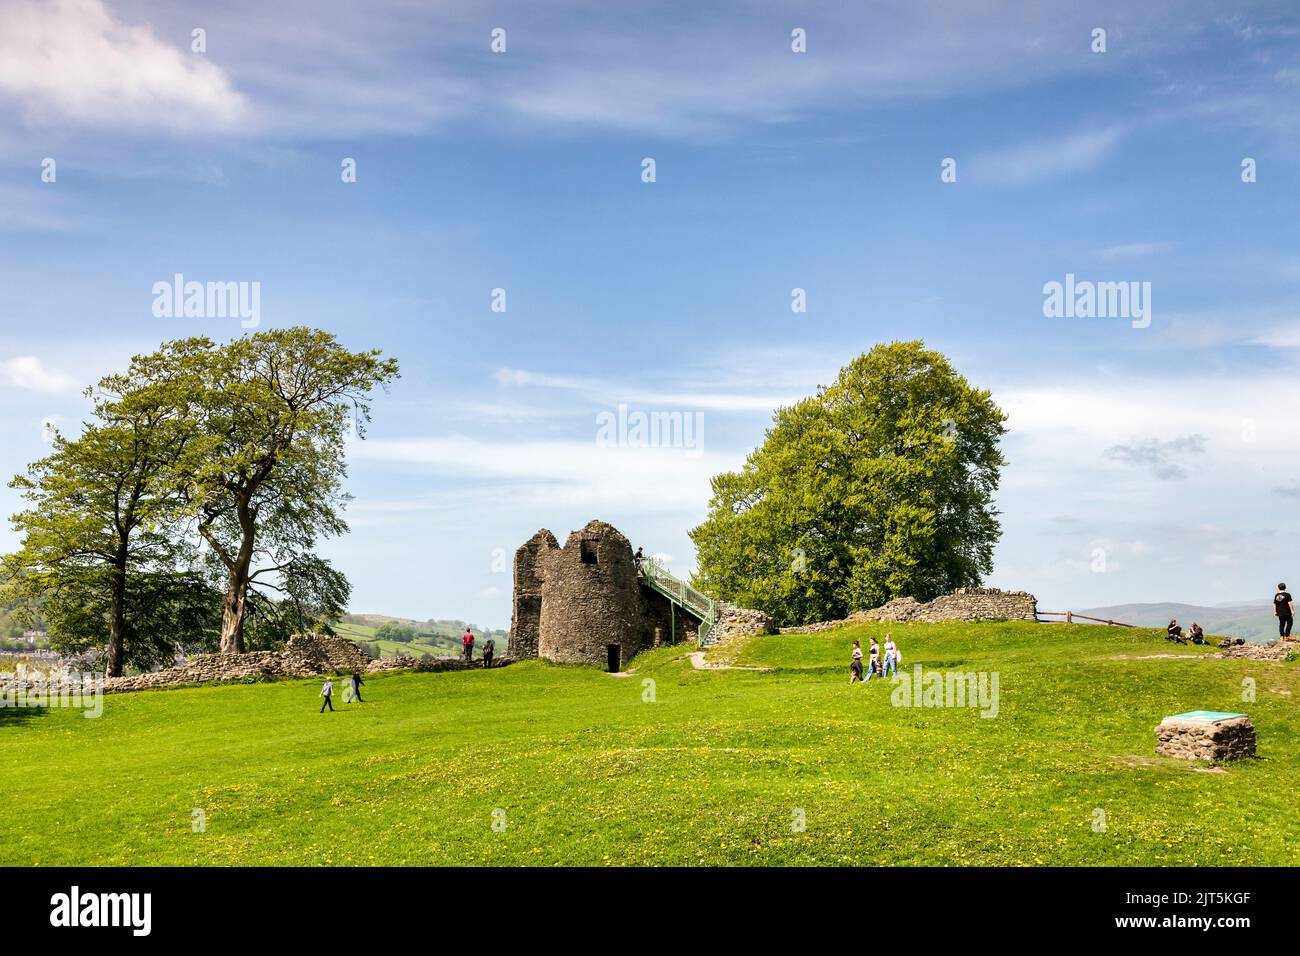 14 May 2022:Kendal, Cumbria, UK - The Castle on a fine spring day, with trees, grass and people walking around. Stock Photo